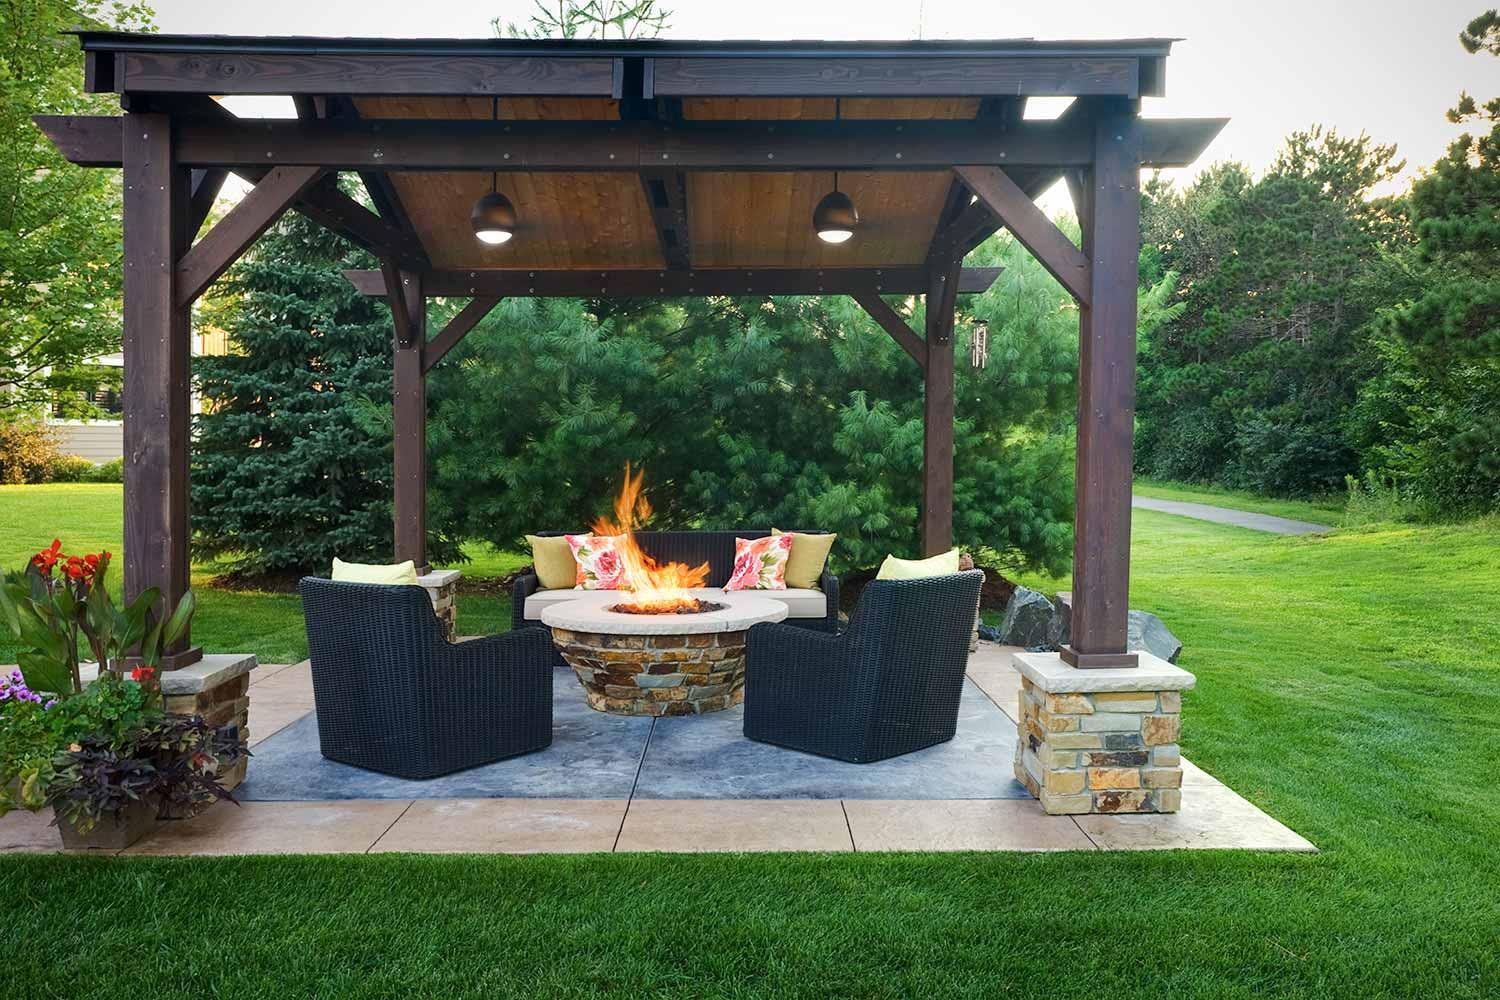 Lakeville, MN backyard landscape and covered pergola with wheelchair accessible fire feature